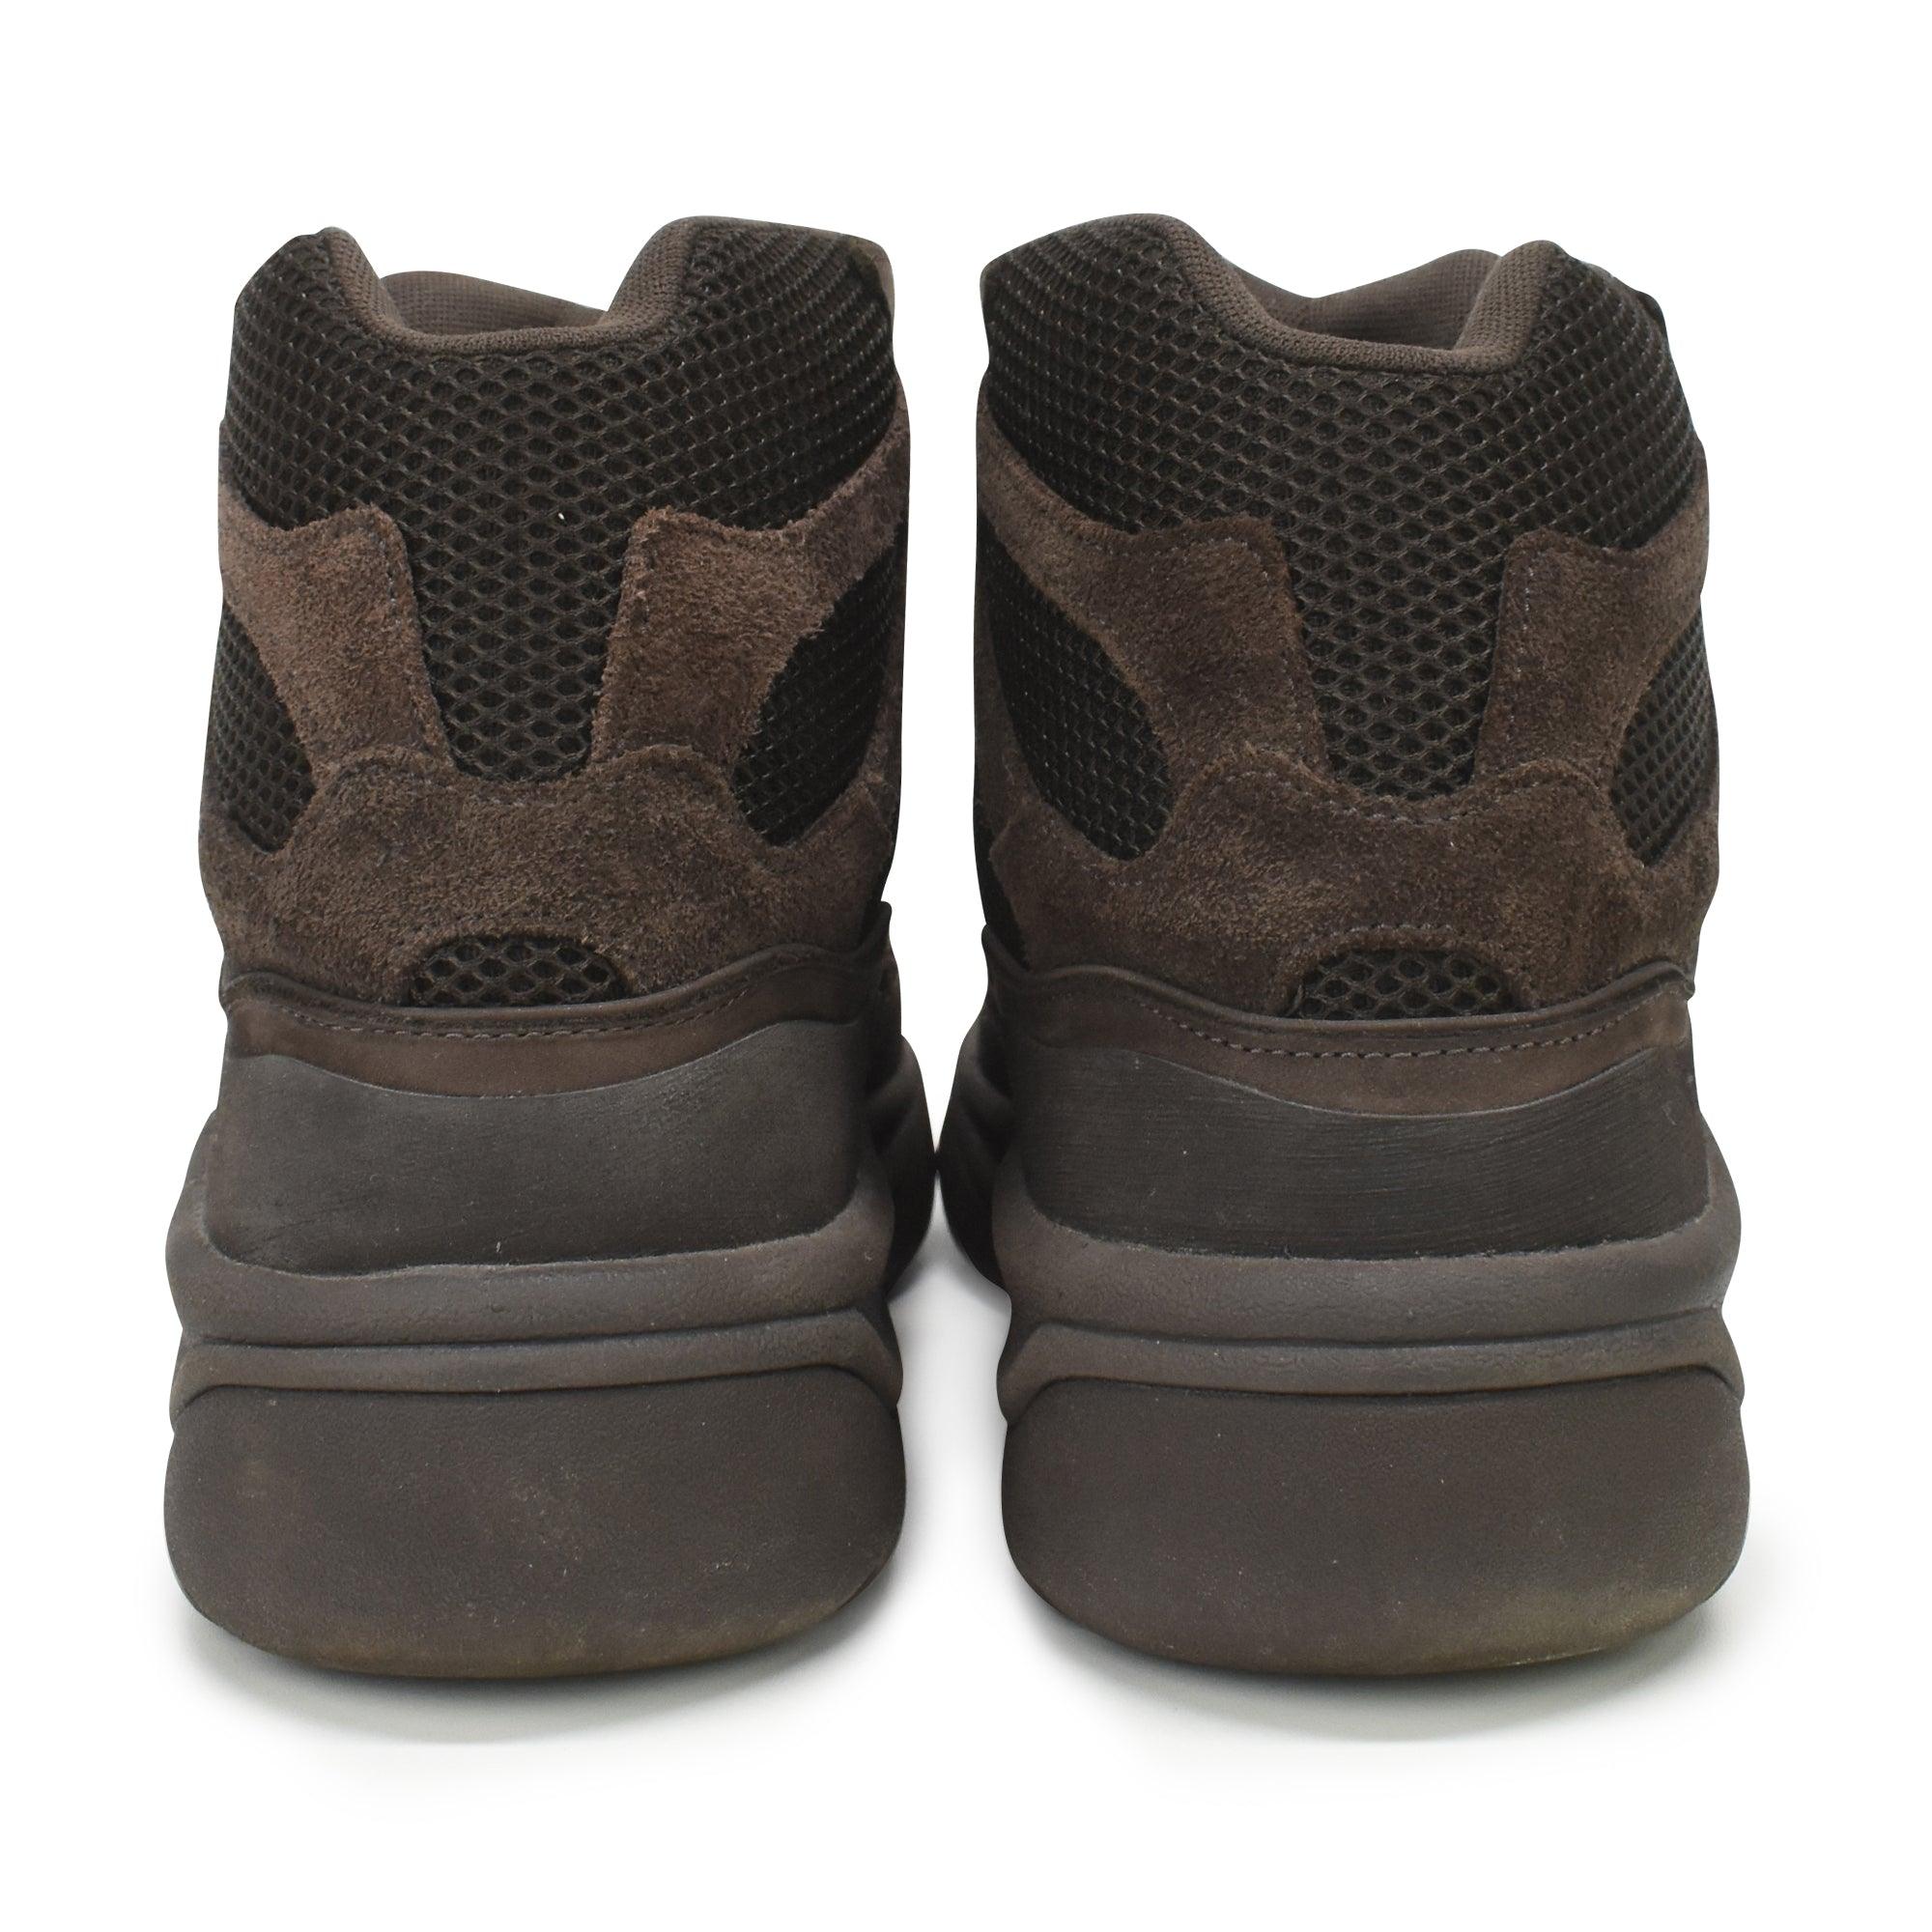 Yeezy 'Desert' Boots - Men's 10 - Fashionably Yours